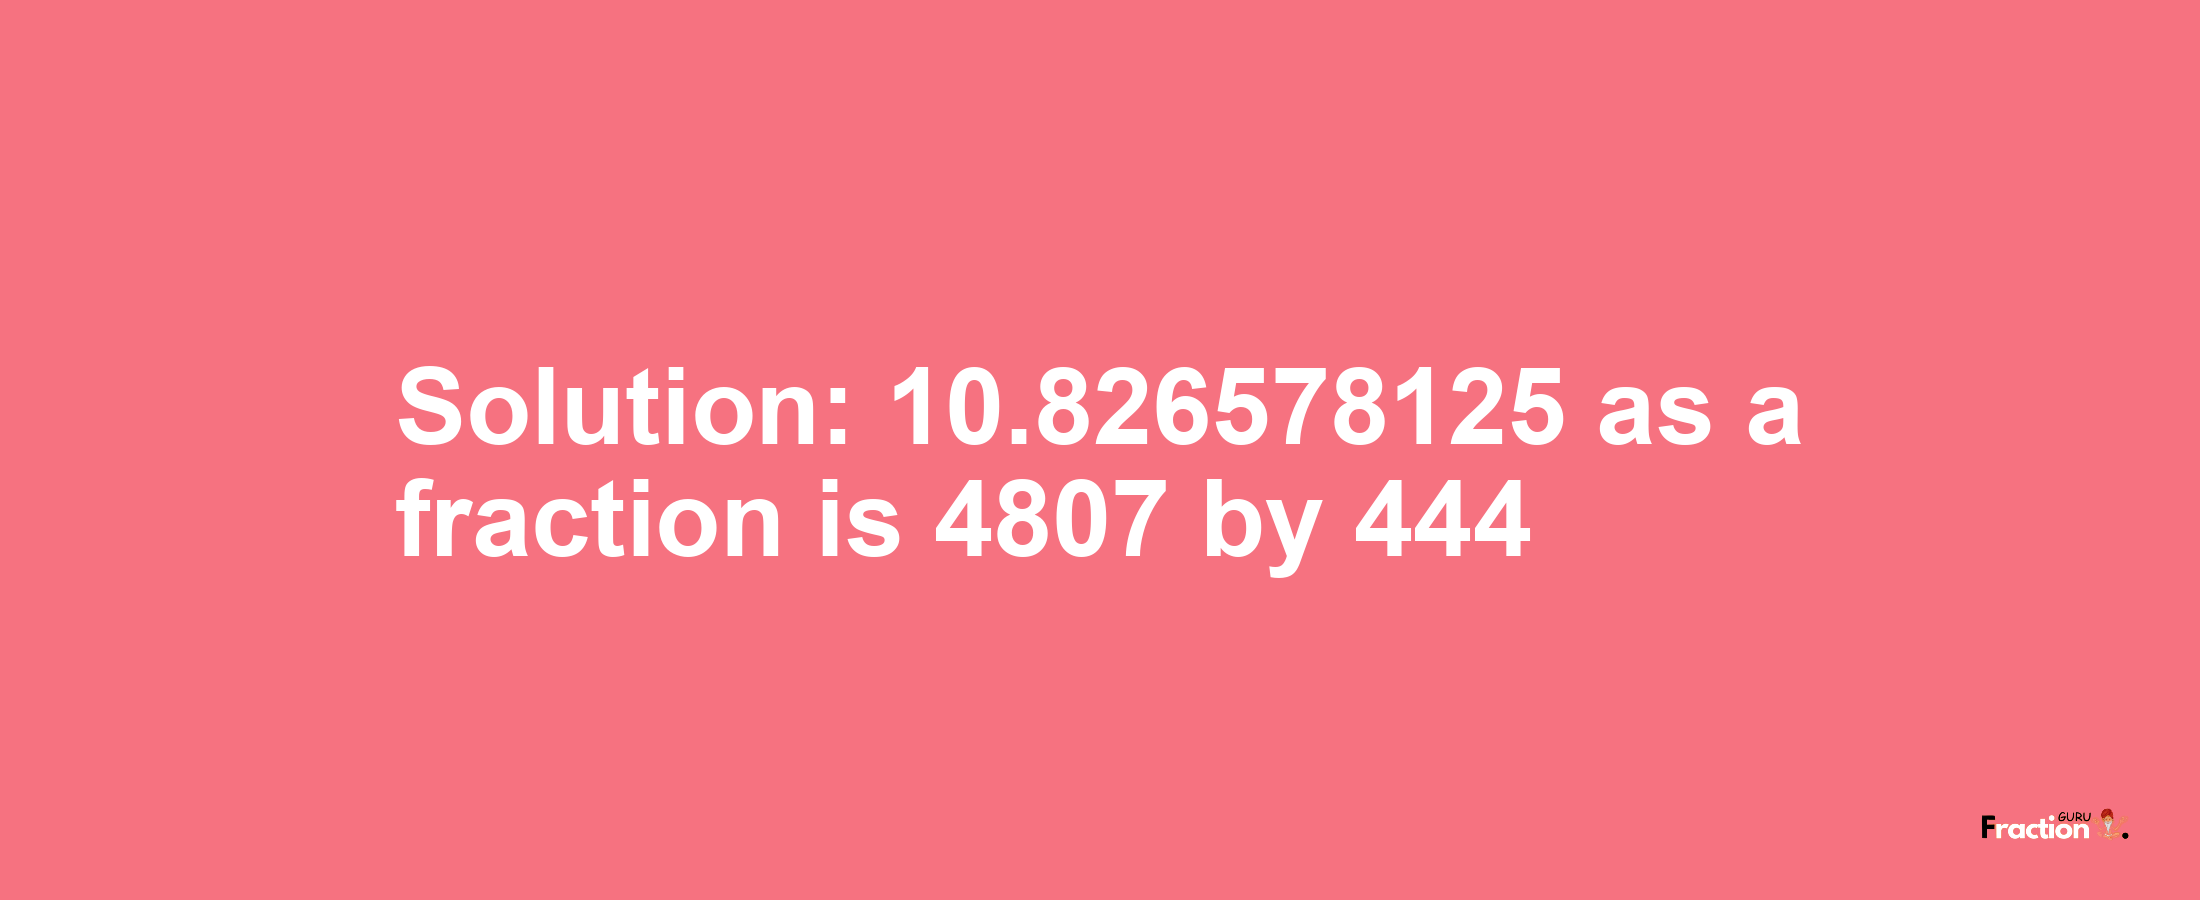 Solution:10.826578125 as a fraction is 4807/444